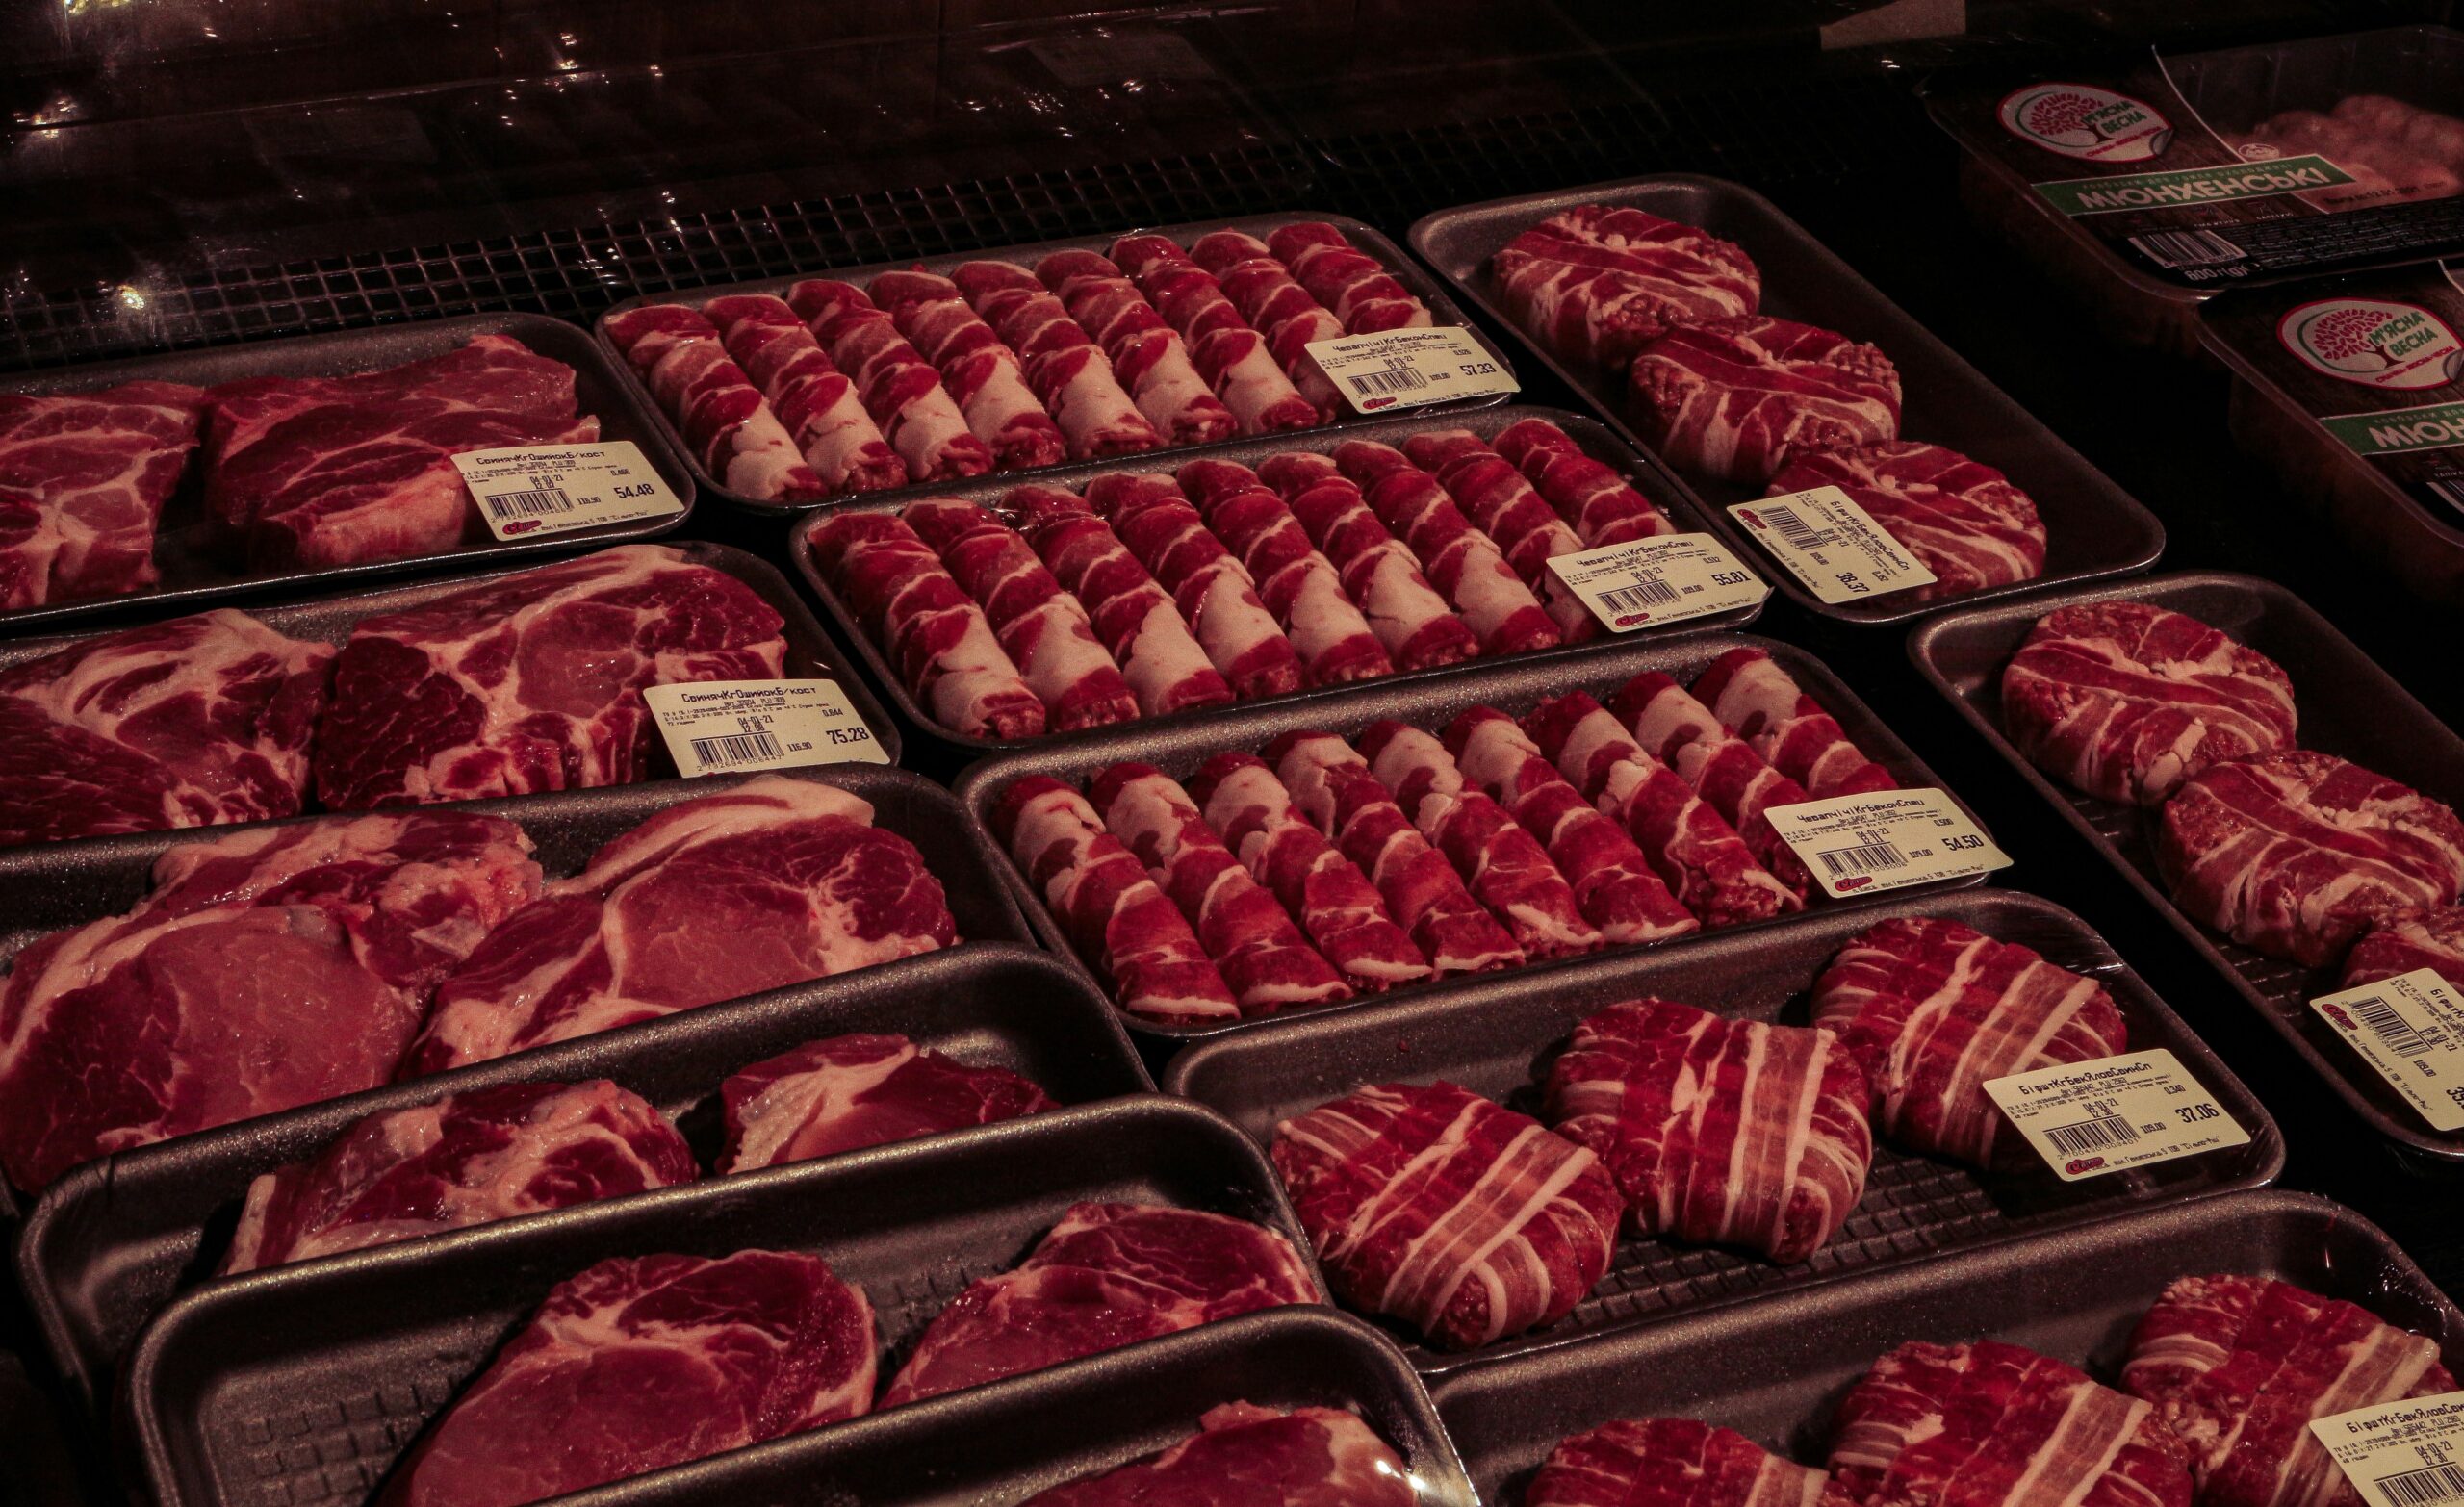 discover the best meat products and recipes with our wide selection of premium meats and cooking ideas.